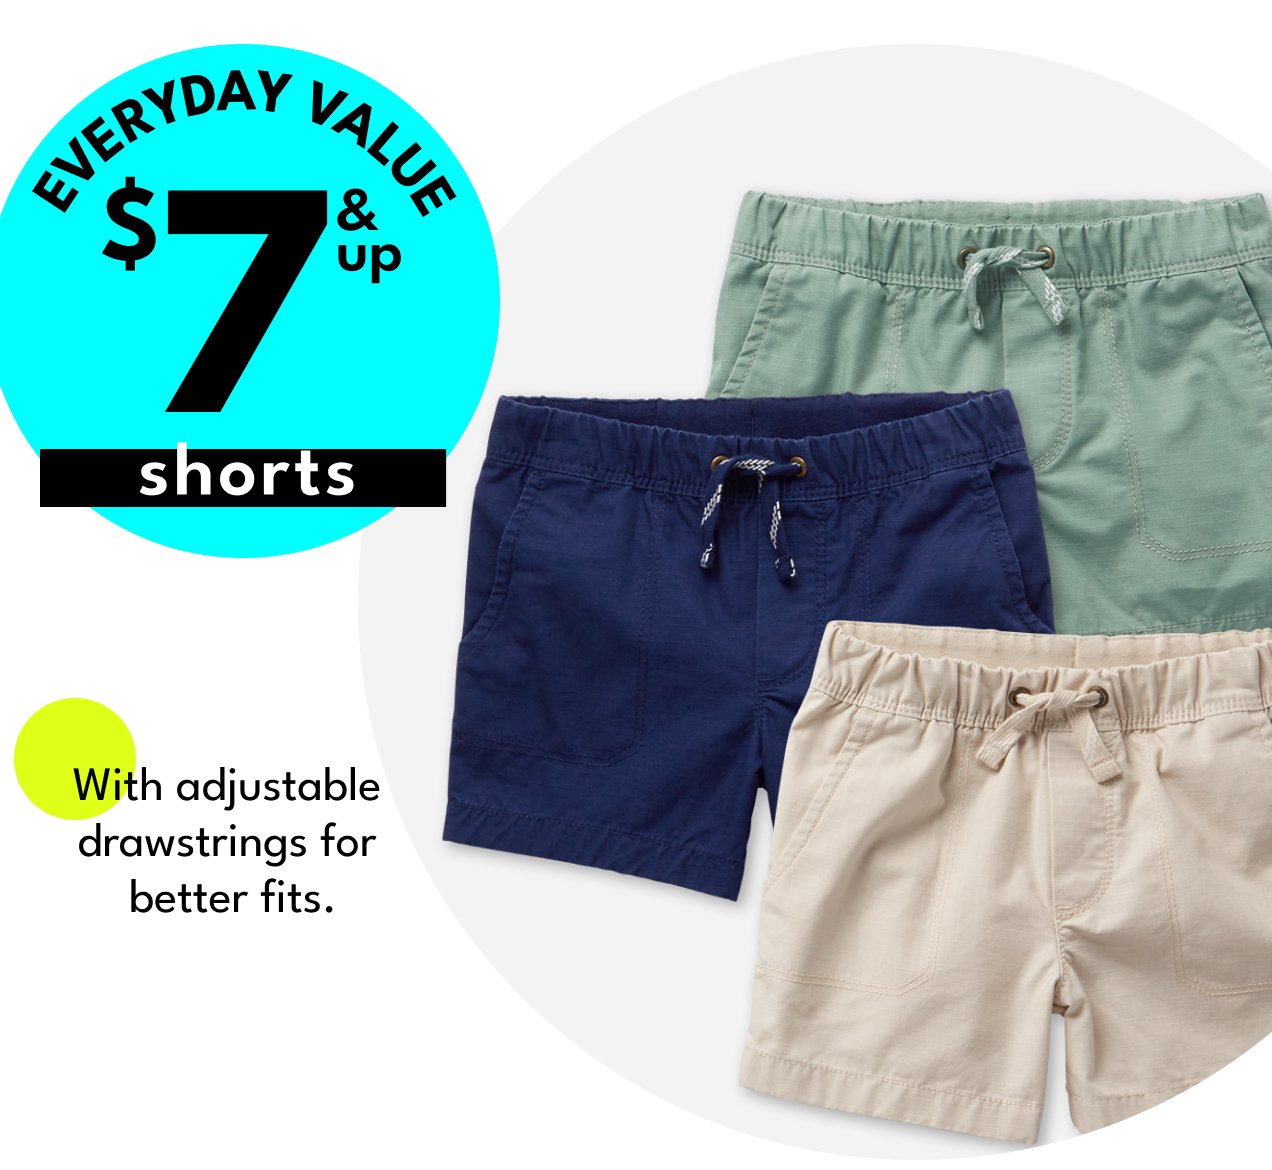 EVERYDAY VALUE | \\$7 & up shorts | With adjustable drawstrings for better fits.